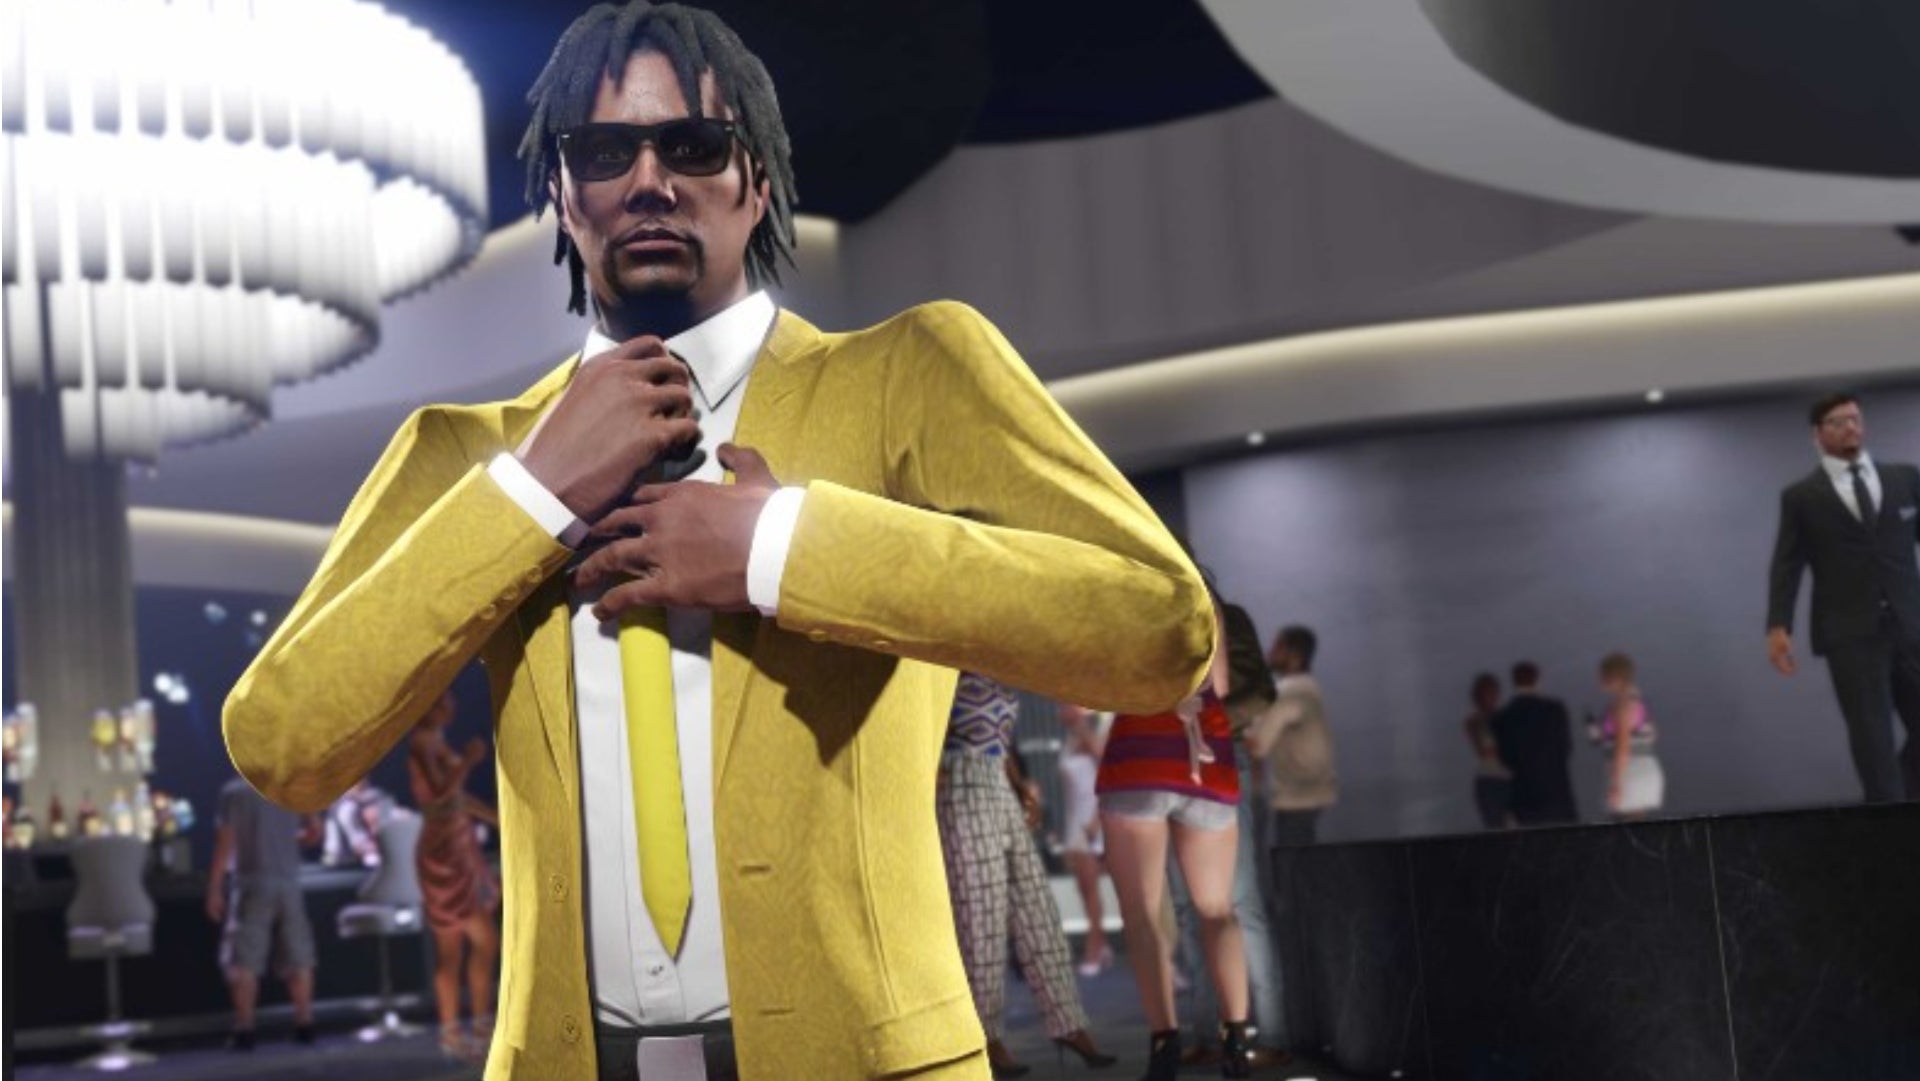 GTA Online, official Rockstar image of a character in a yellow suit in the Diamond Casino.